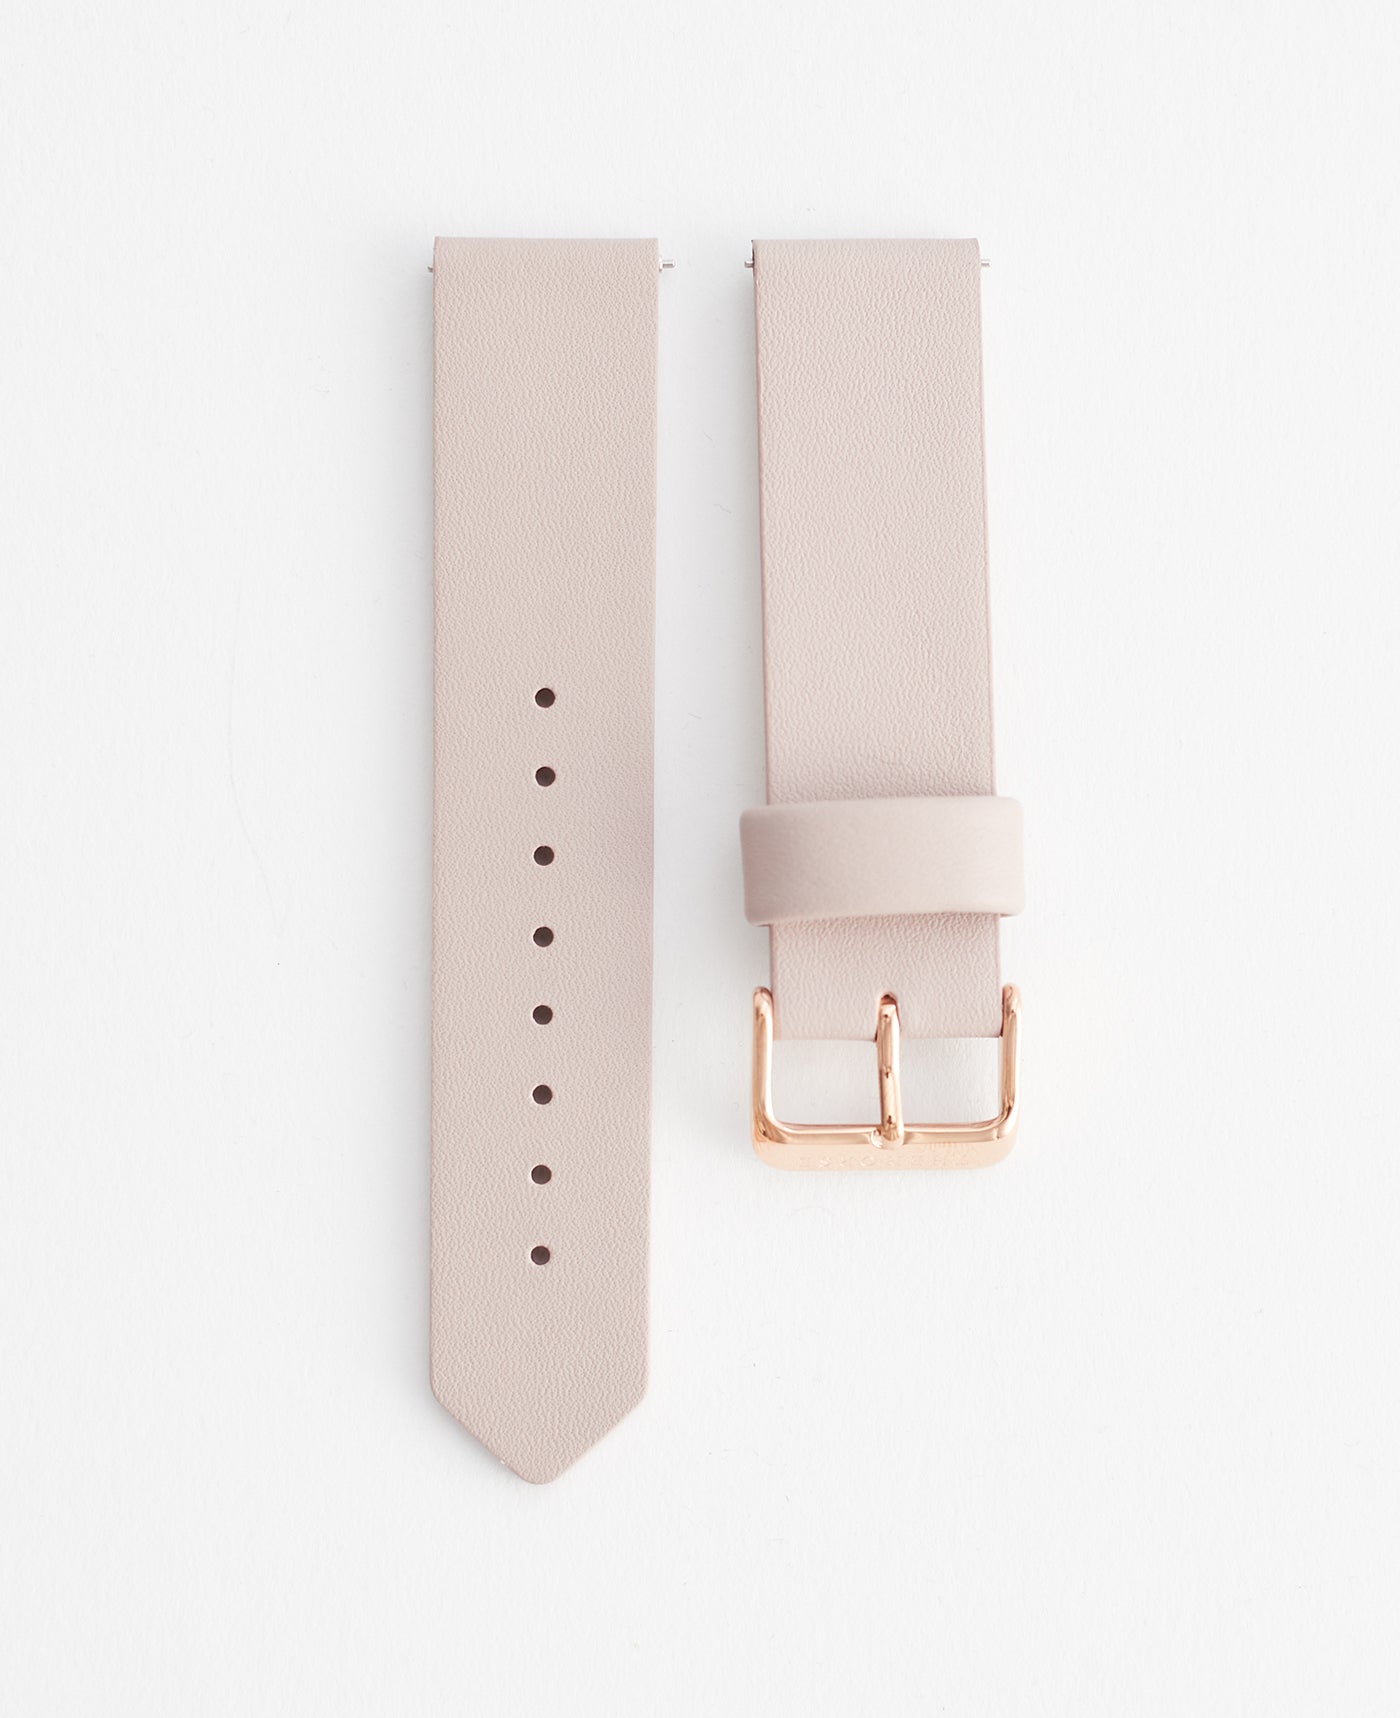 The 20mm Original Watch in Blush Leather / Rose Gold Strap by The Horse®